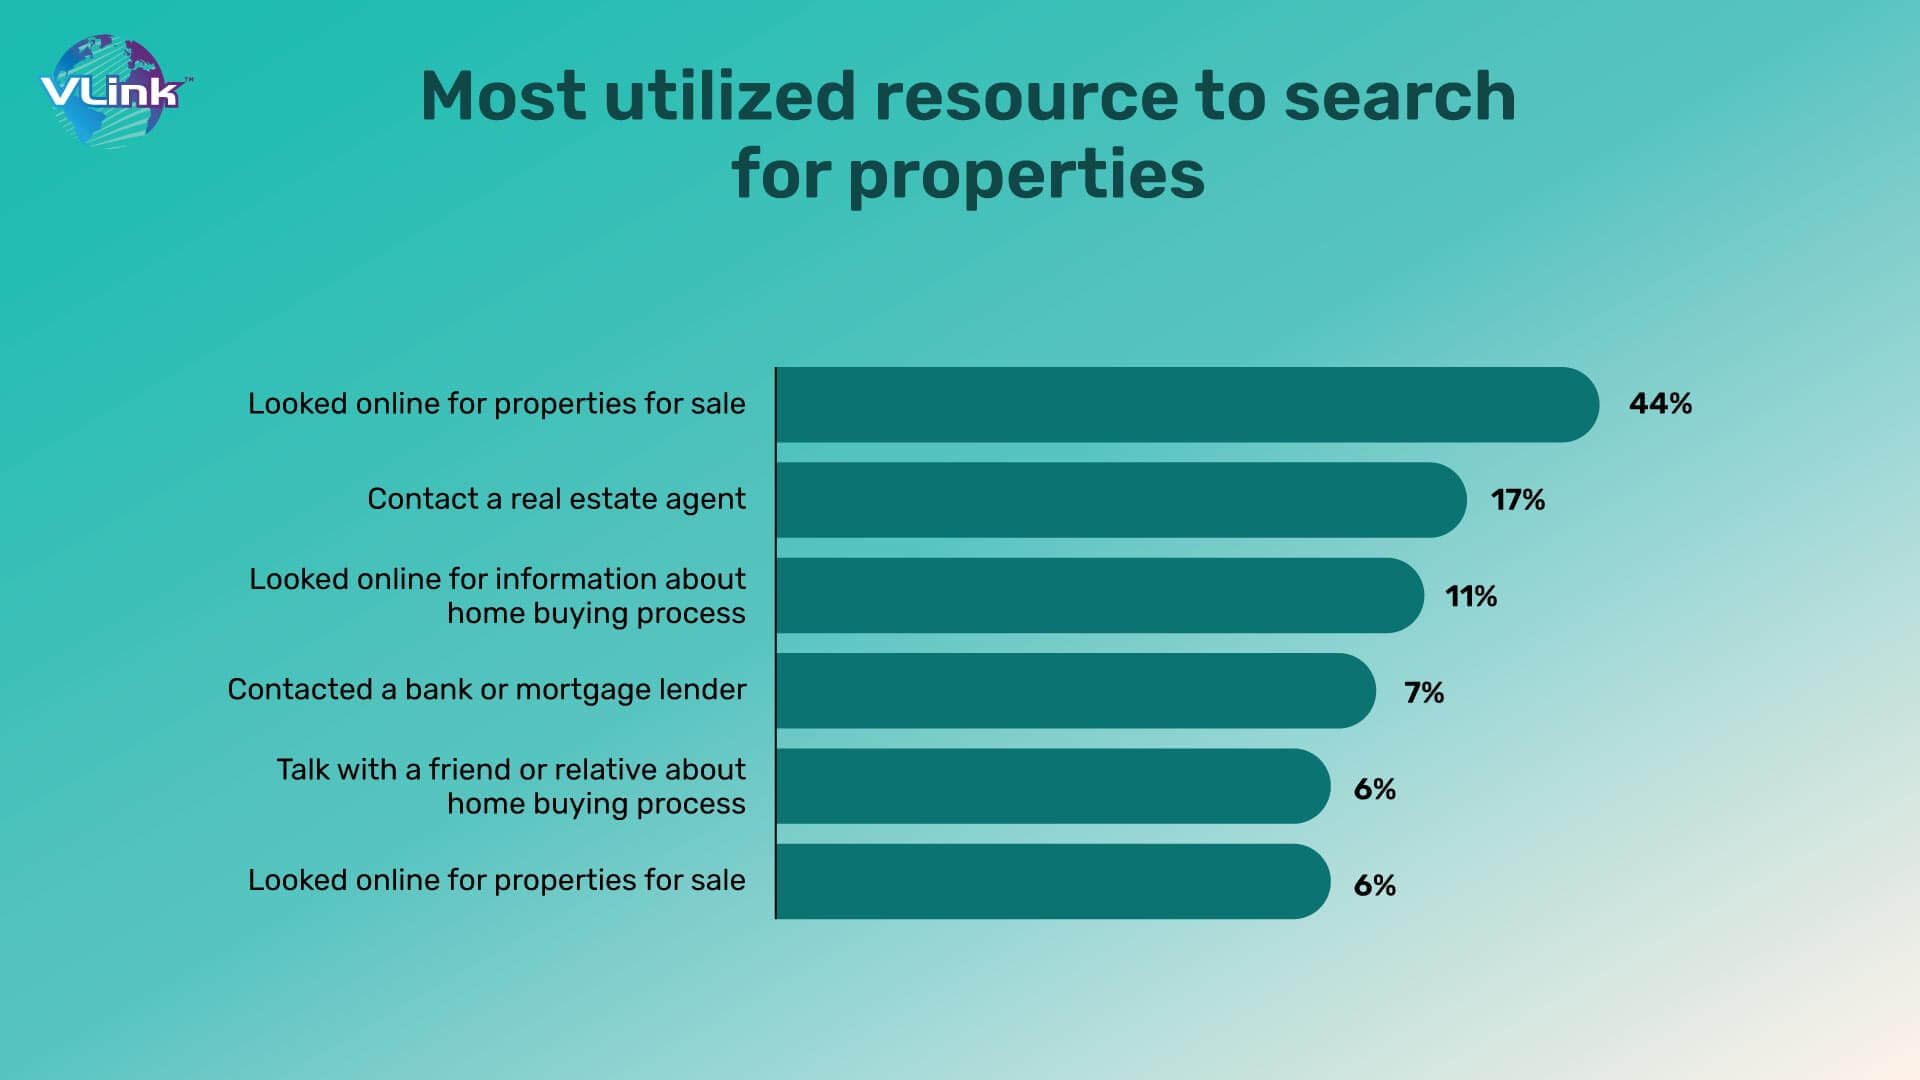 Most utilized resource to search for properties